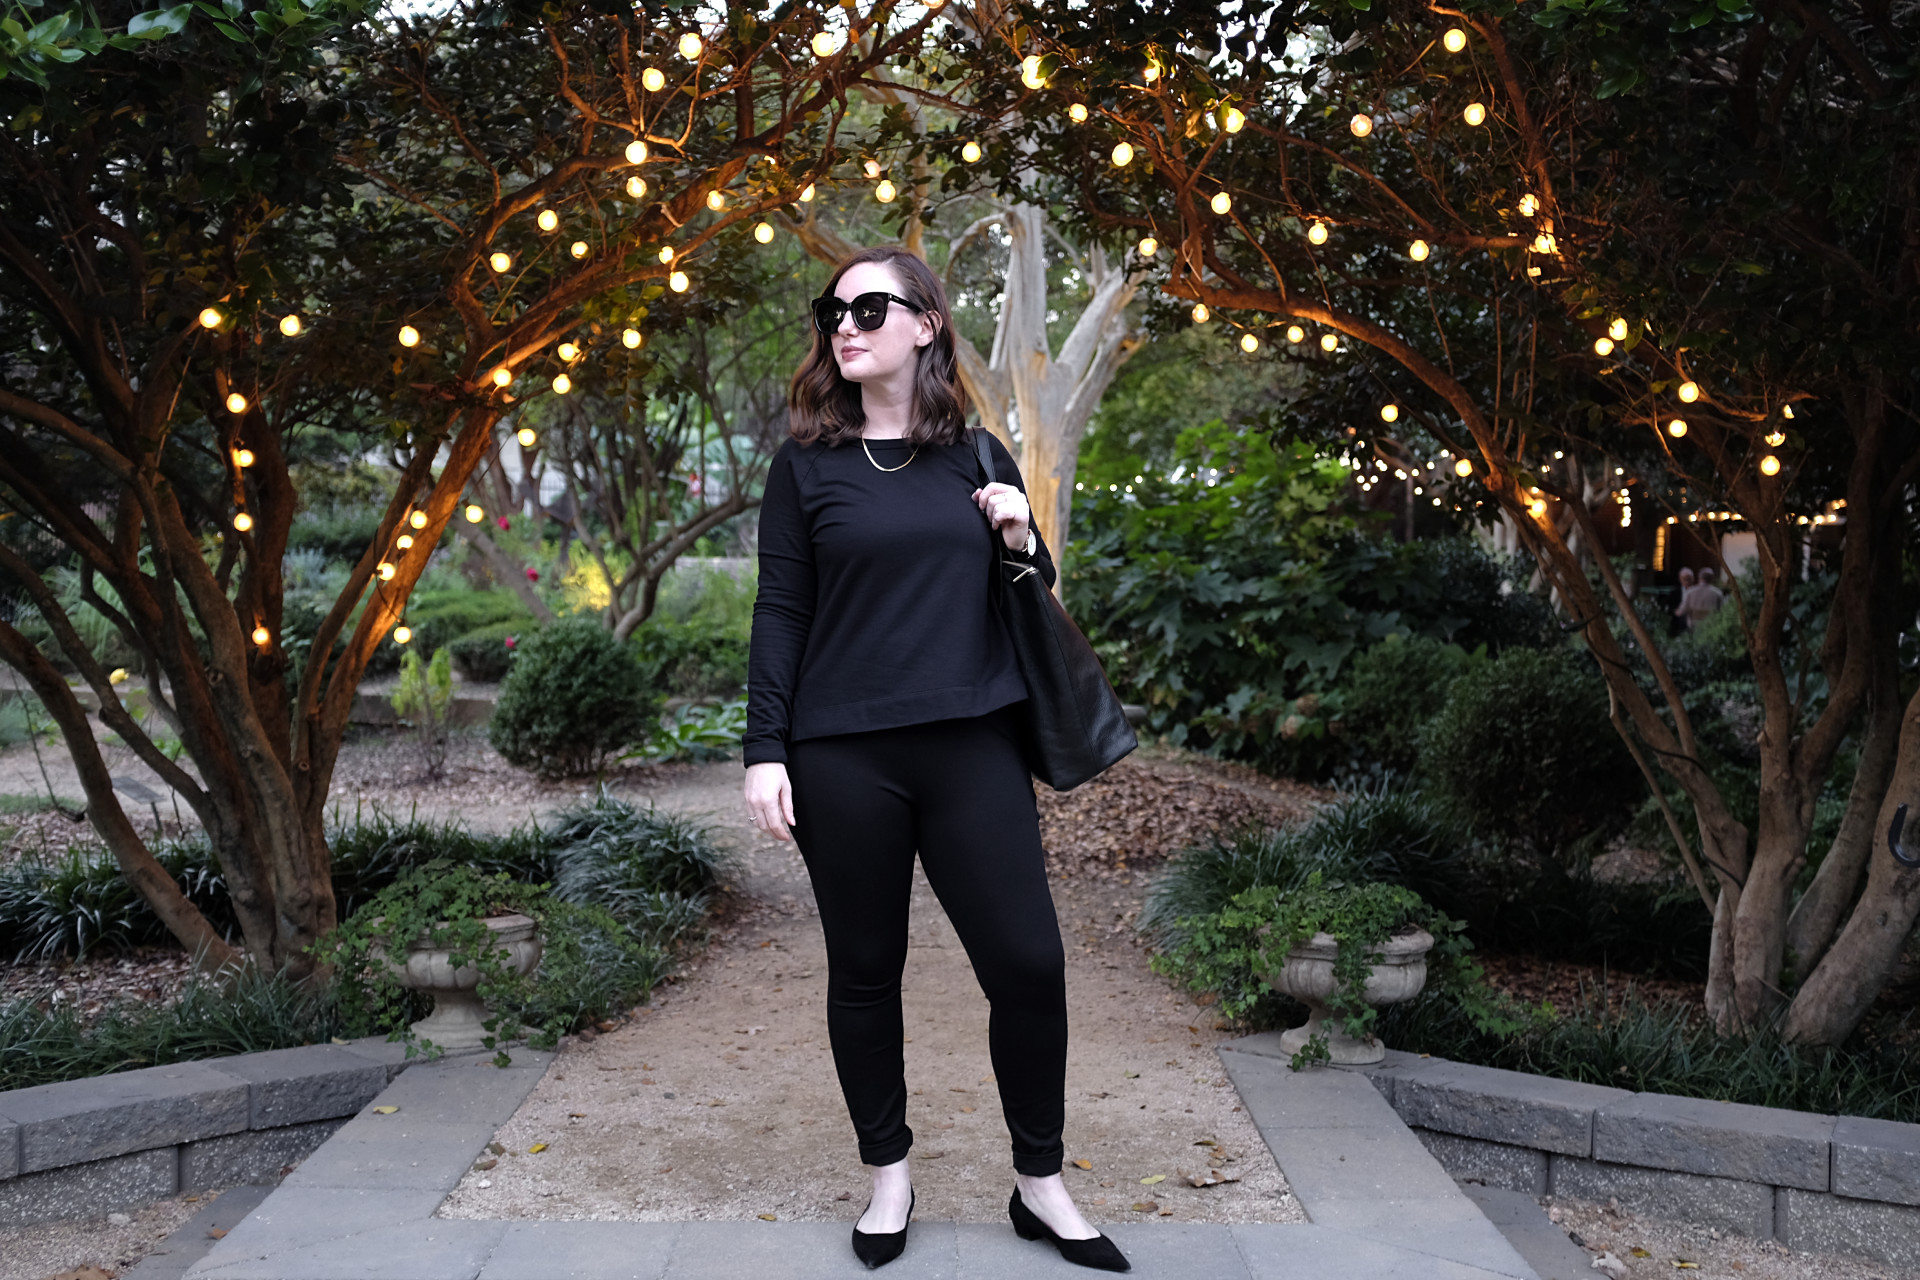 A white woman stands in a garden strung with fairy lights. She is wearing black from head to toe: a black sweatshirt, black pants, black shoes, black sunglasses, and is carrying a black bag. She is looking off to her right.